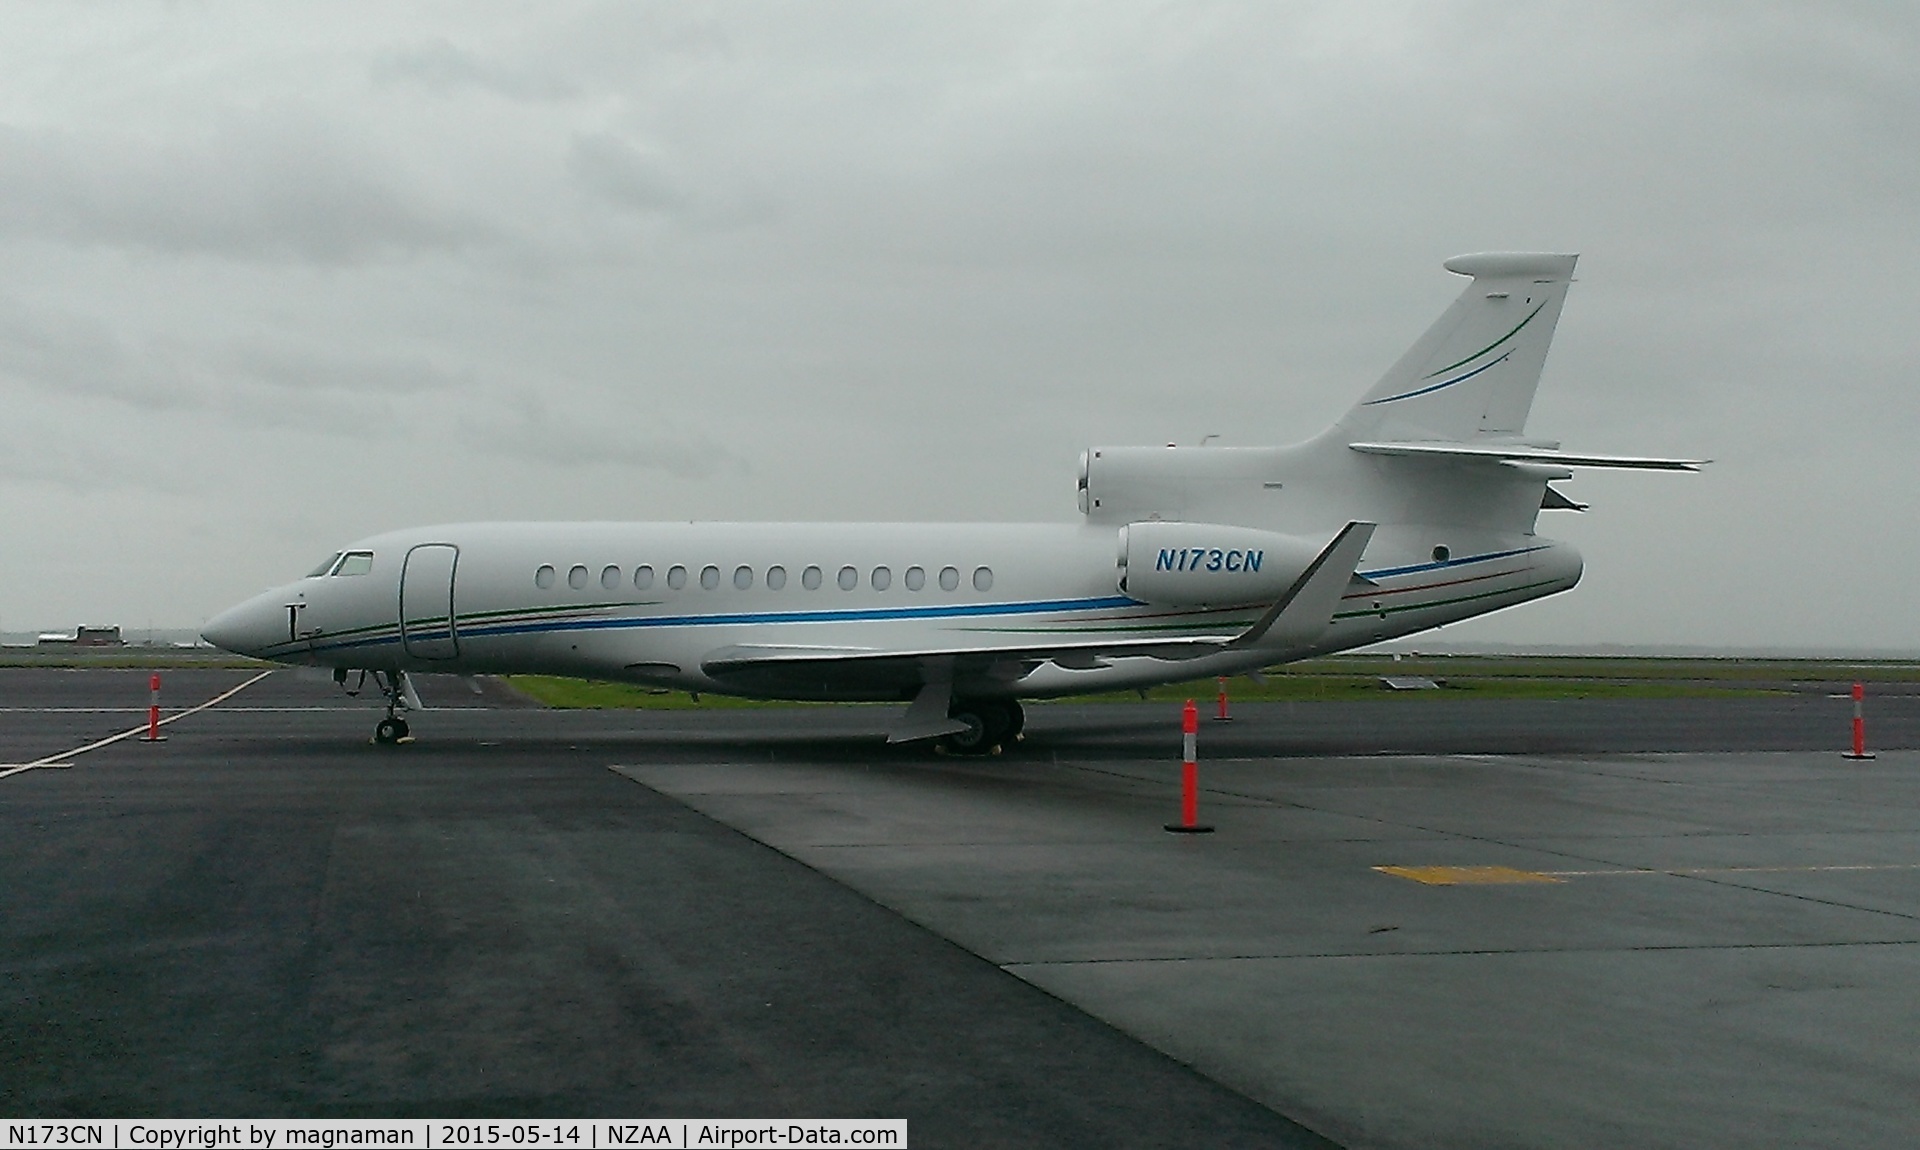 N173CN, 2012 Dassault Falcon 7X C/N 173, arrived at AKL early today.